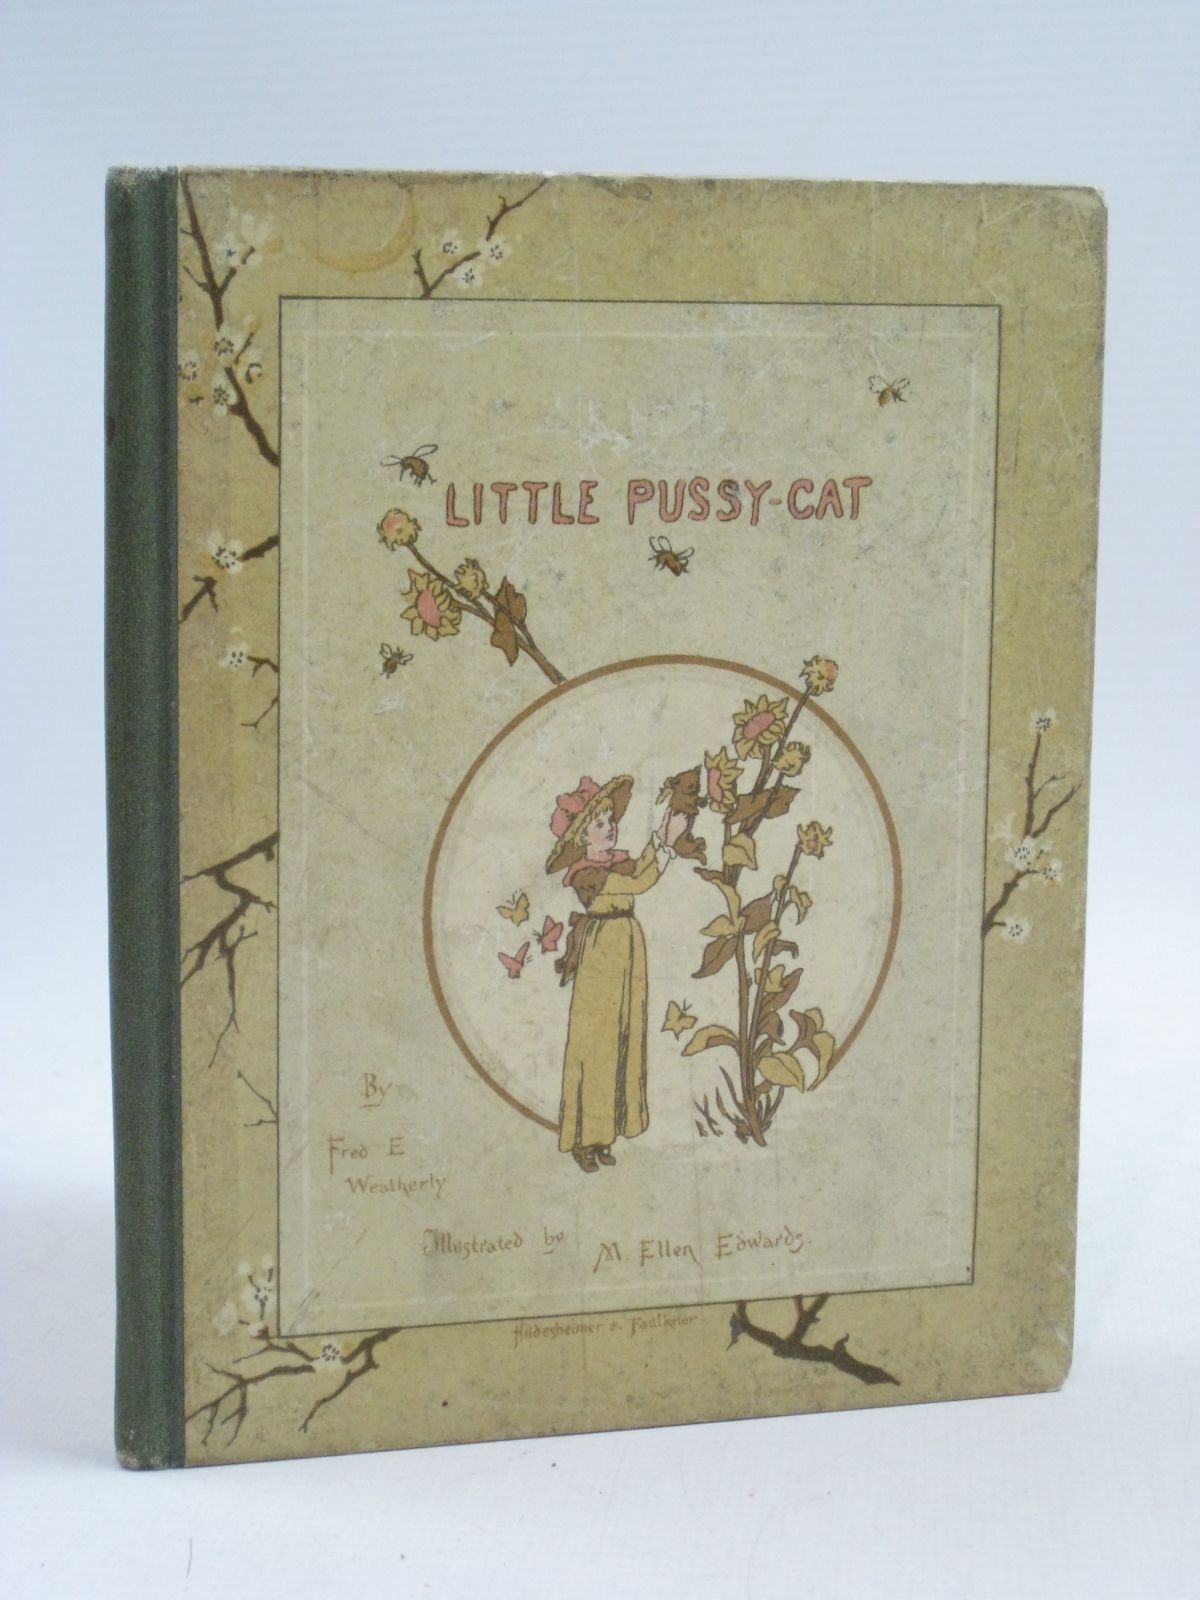 Cover of LITTLE PUSSY-CAT by F.E. Weatherly